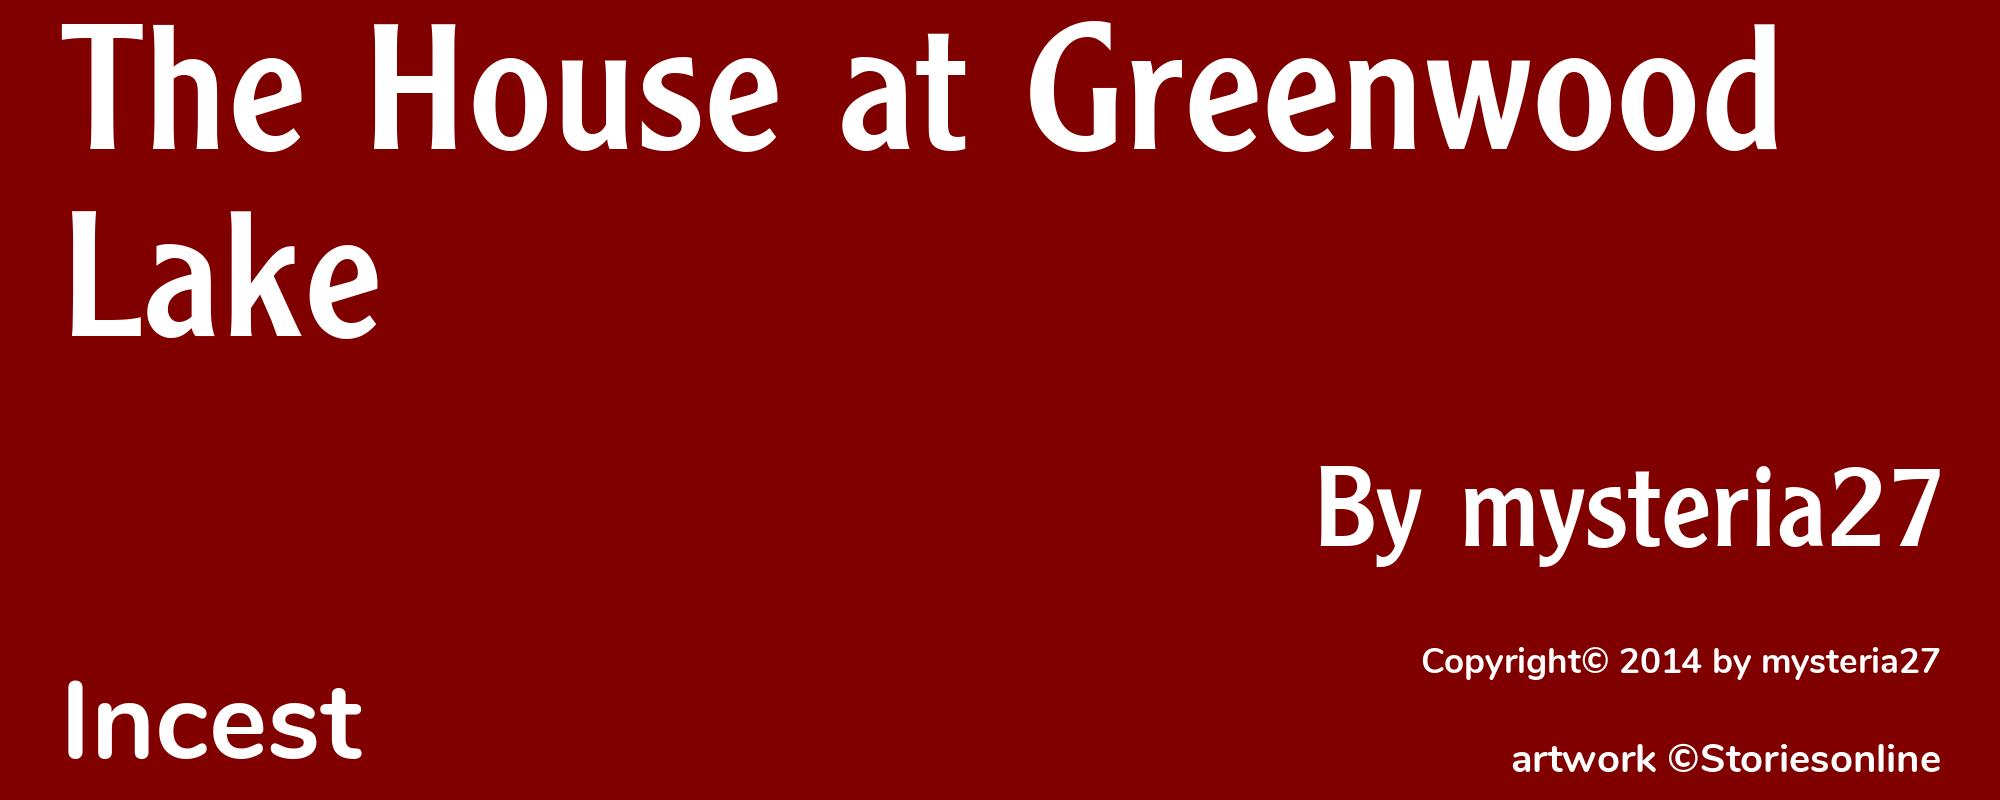 The House at Greenwood Lake - Cover